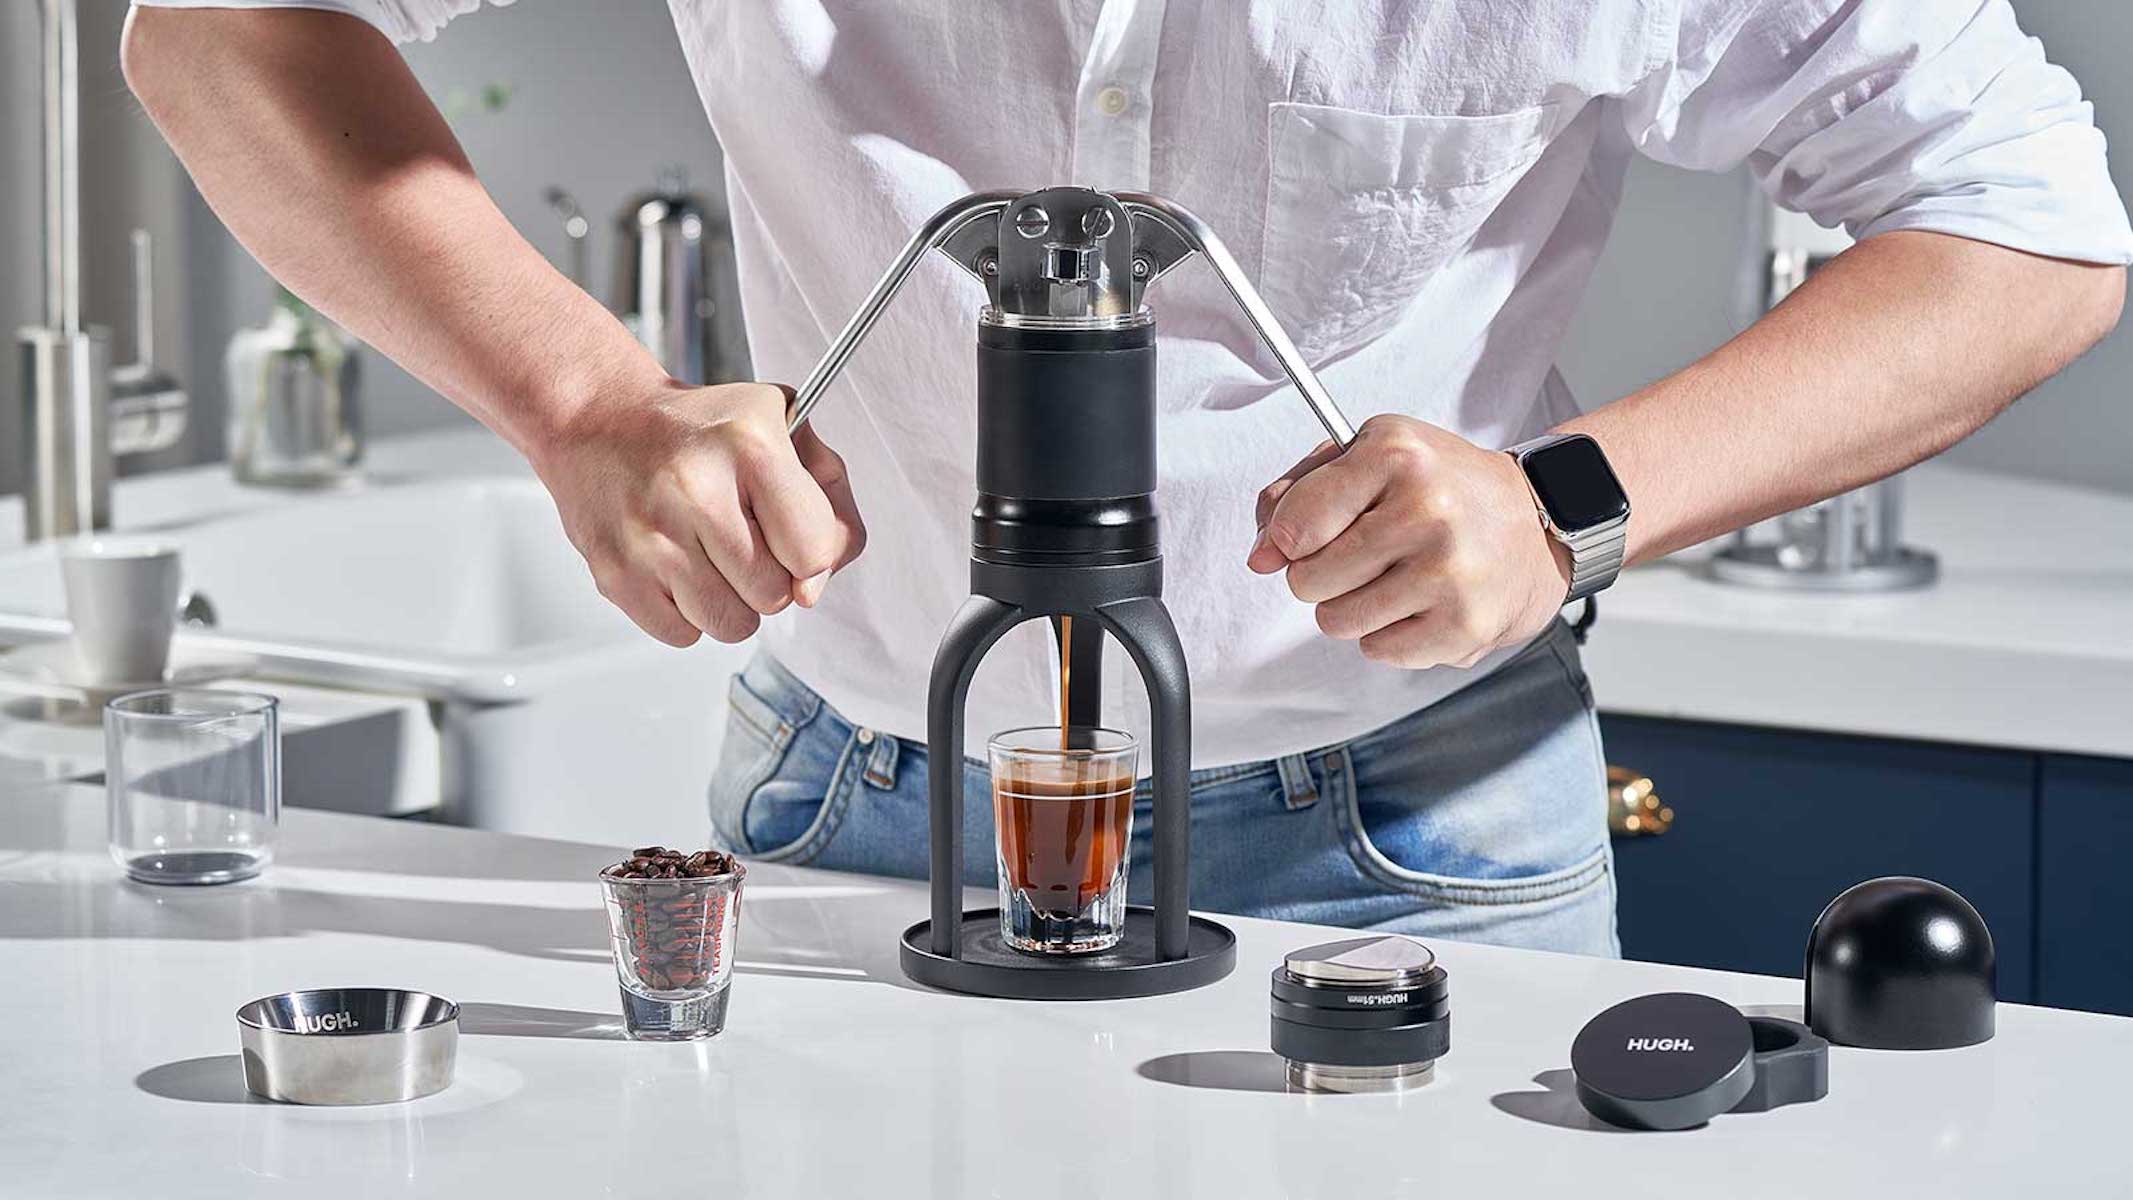 19 Best Coffee Accessories - Cool Gadgets for Making Coffee